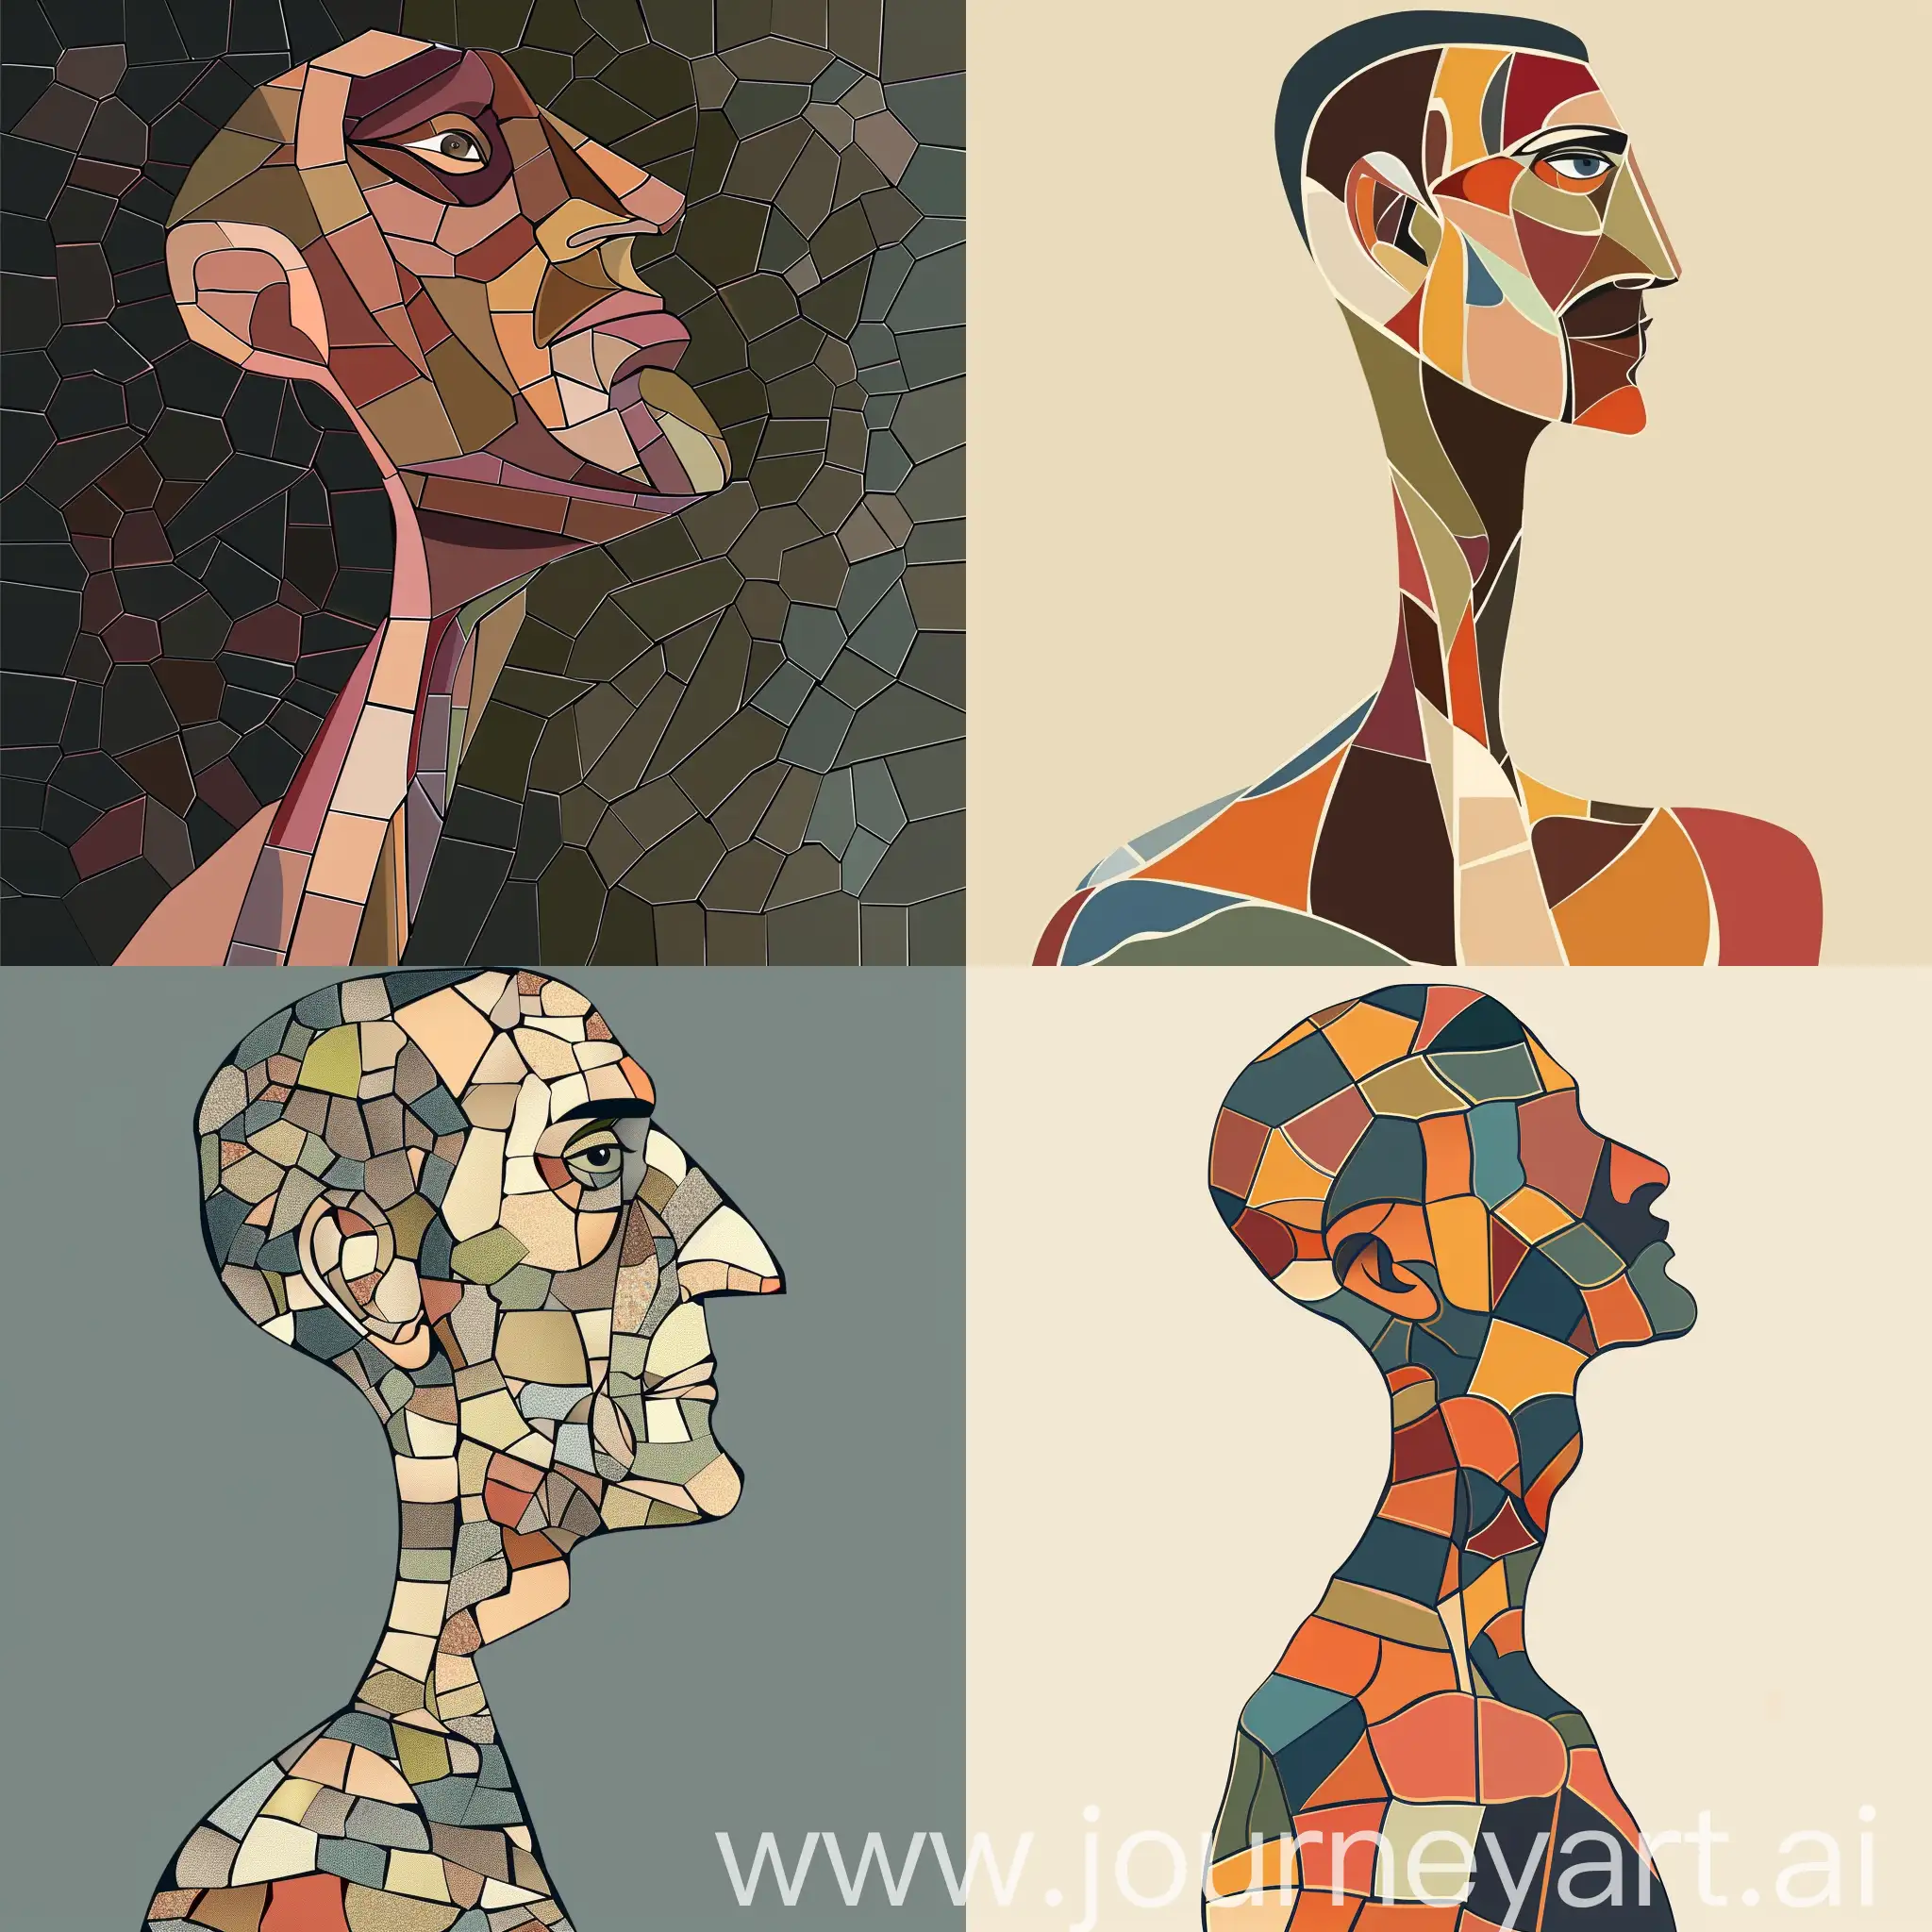 Harmonious-Mosaic-Portrait-Abstract-Male-Character-with-Minimalist-Design